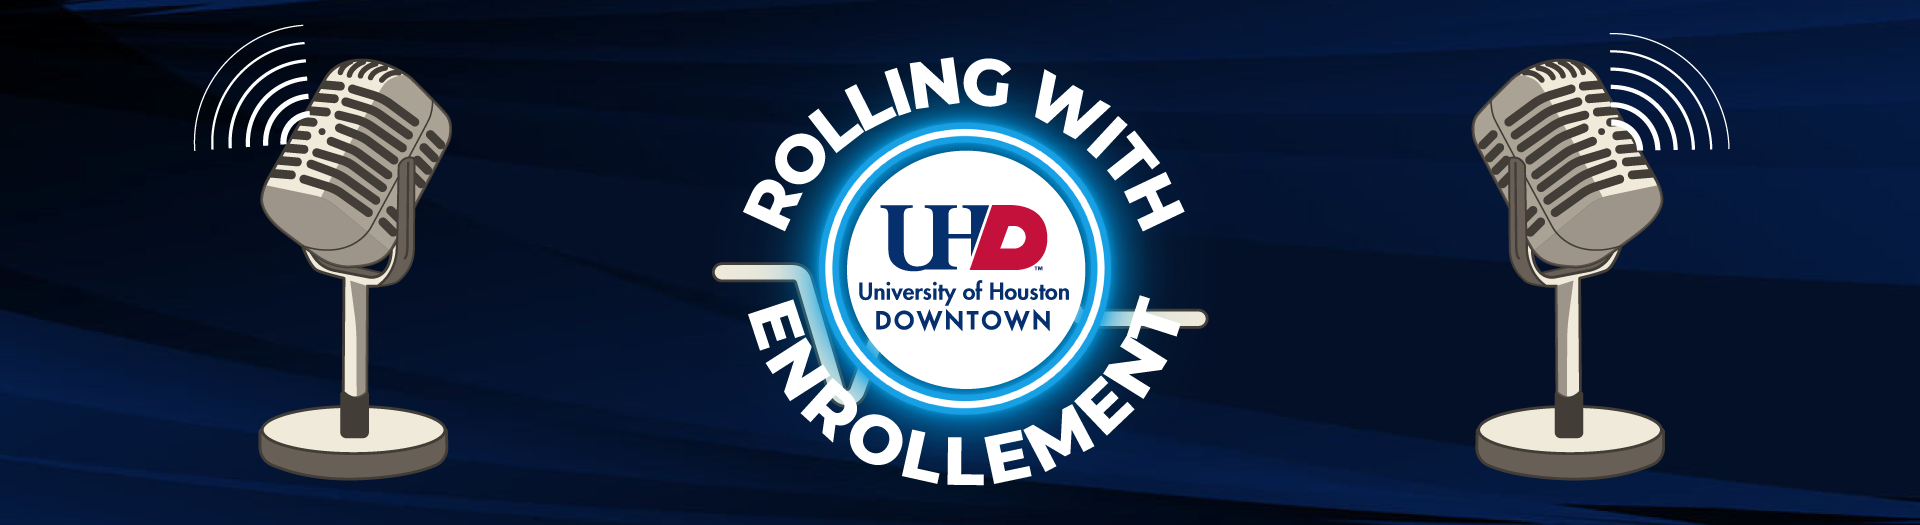 Rolling with Enrollment Podcasts